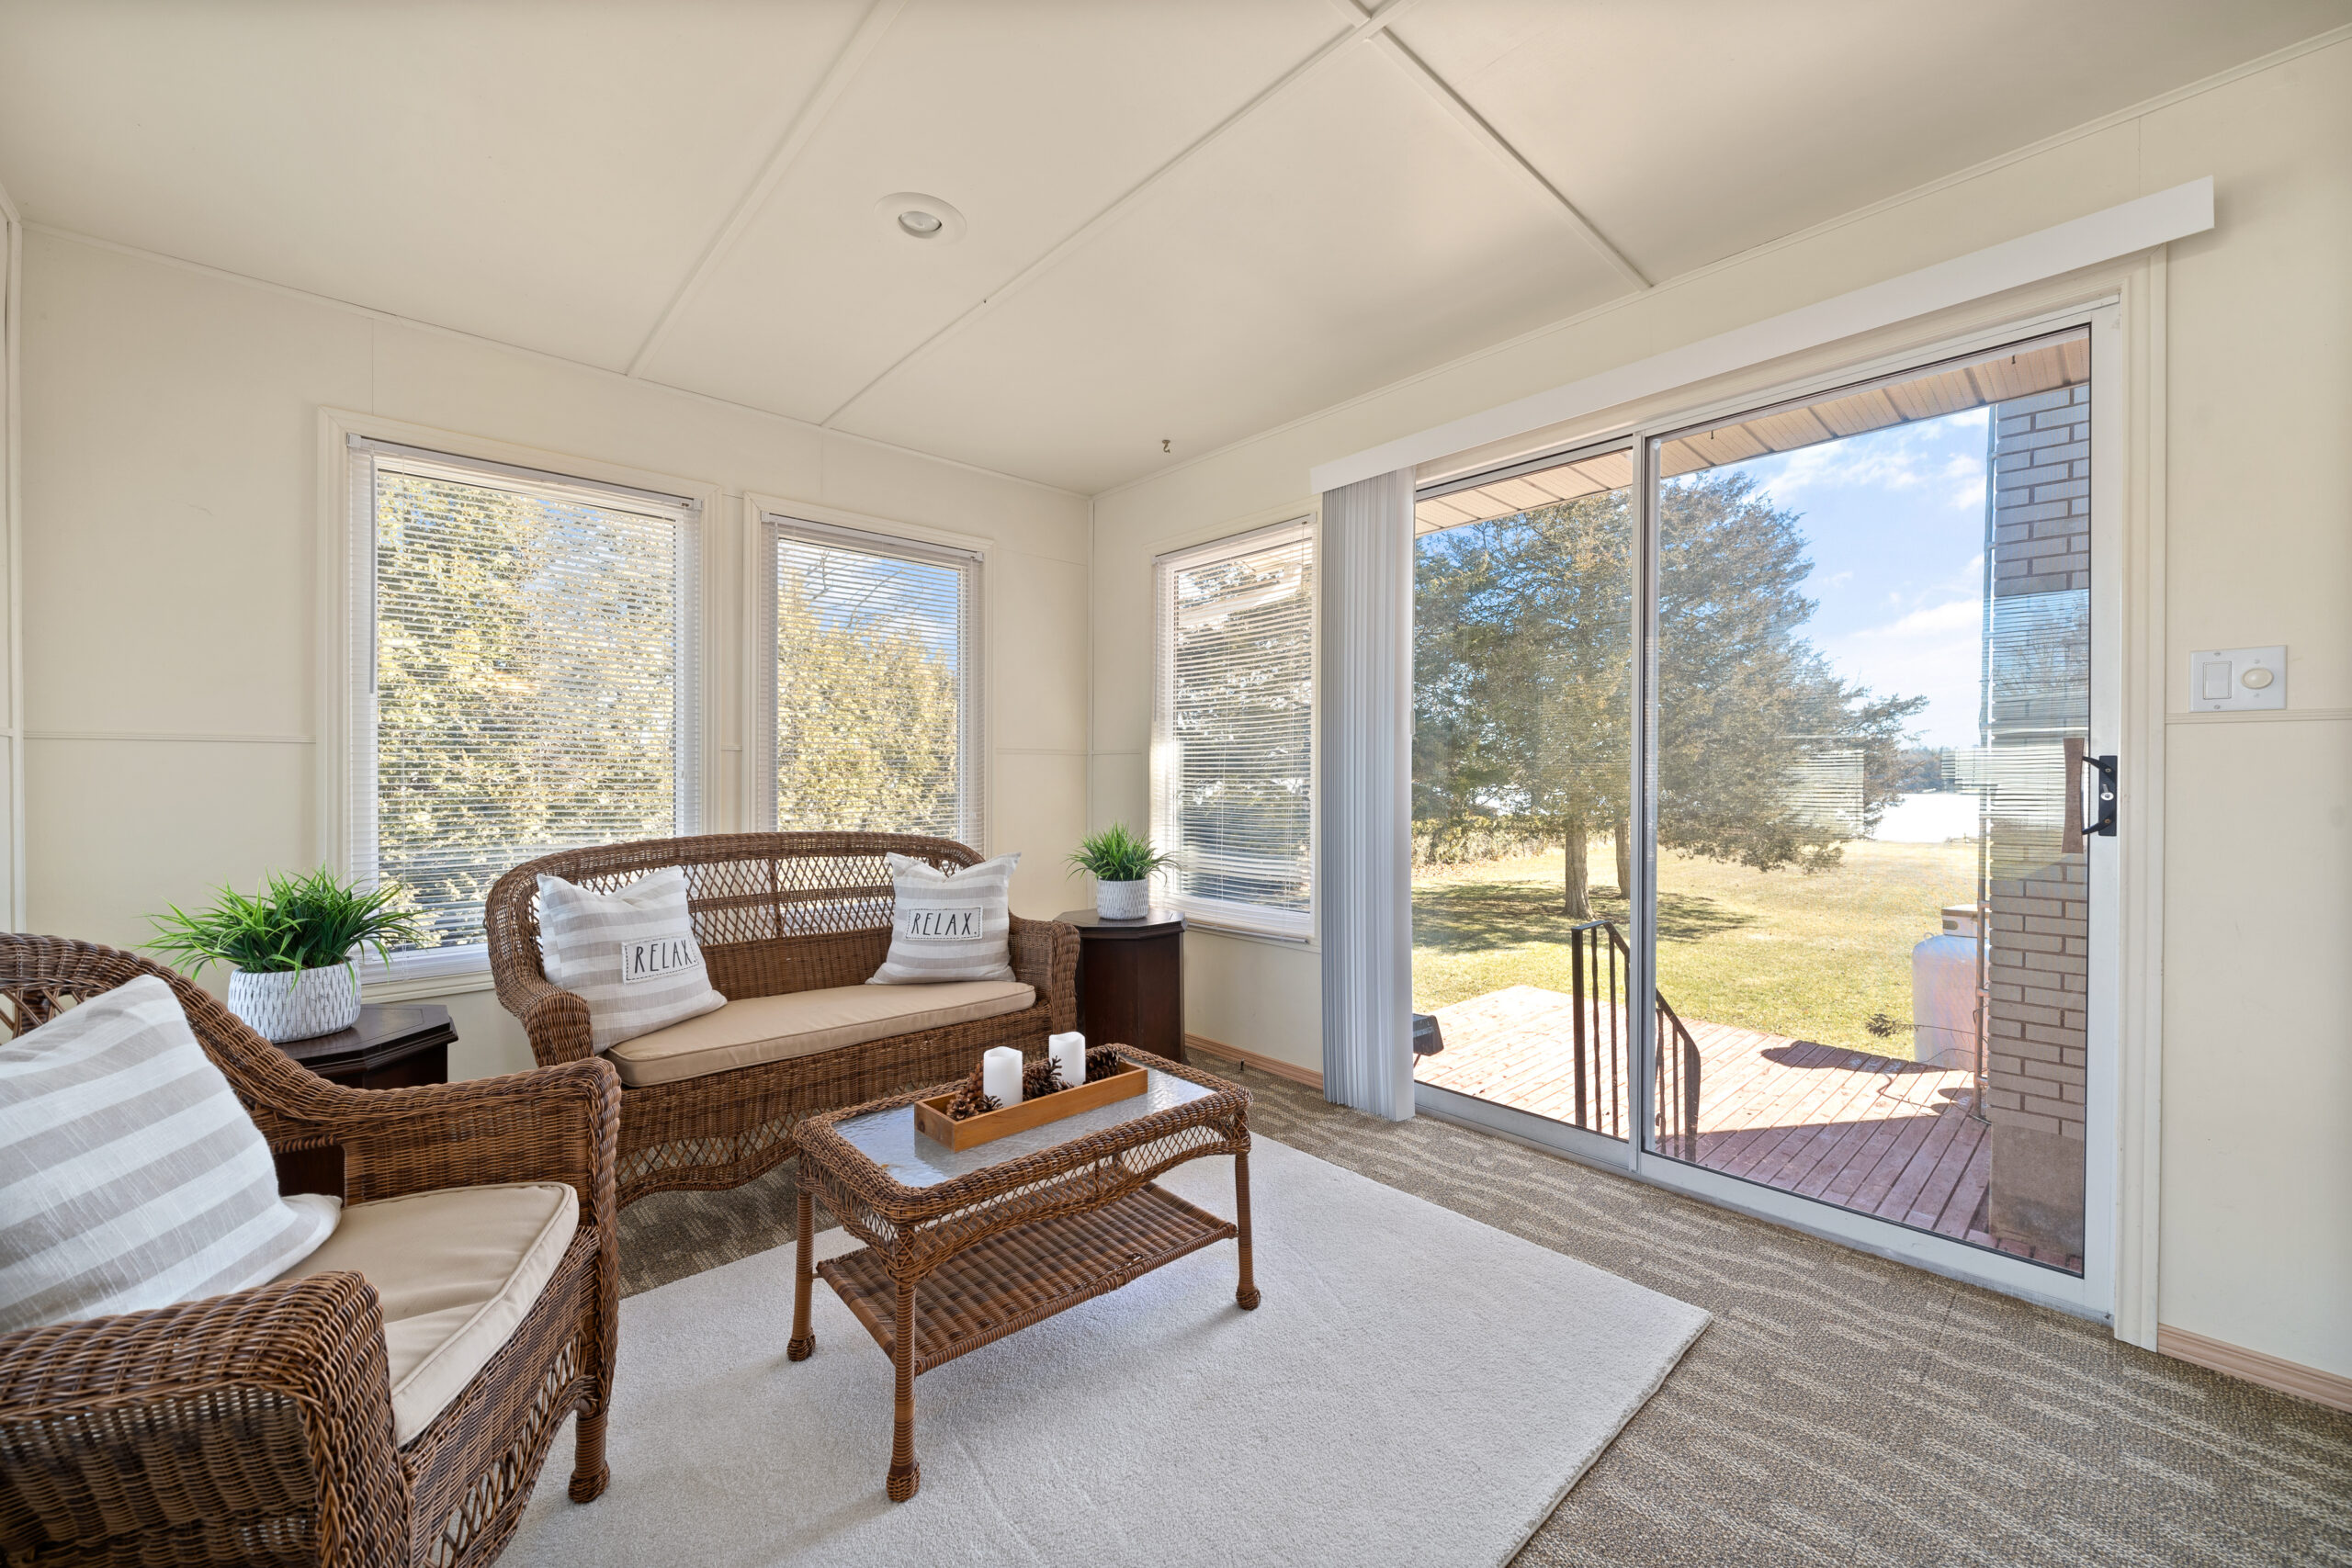 A sunroom with big windows and wicker furniture. Double glass doors lead out to a small porch.